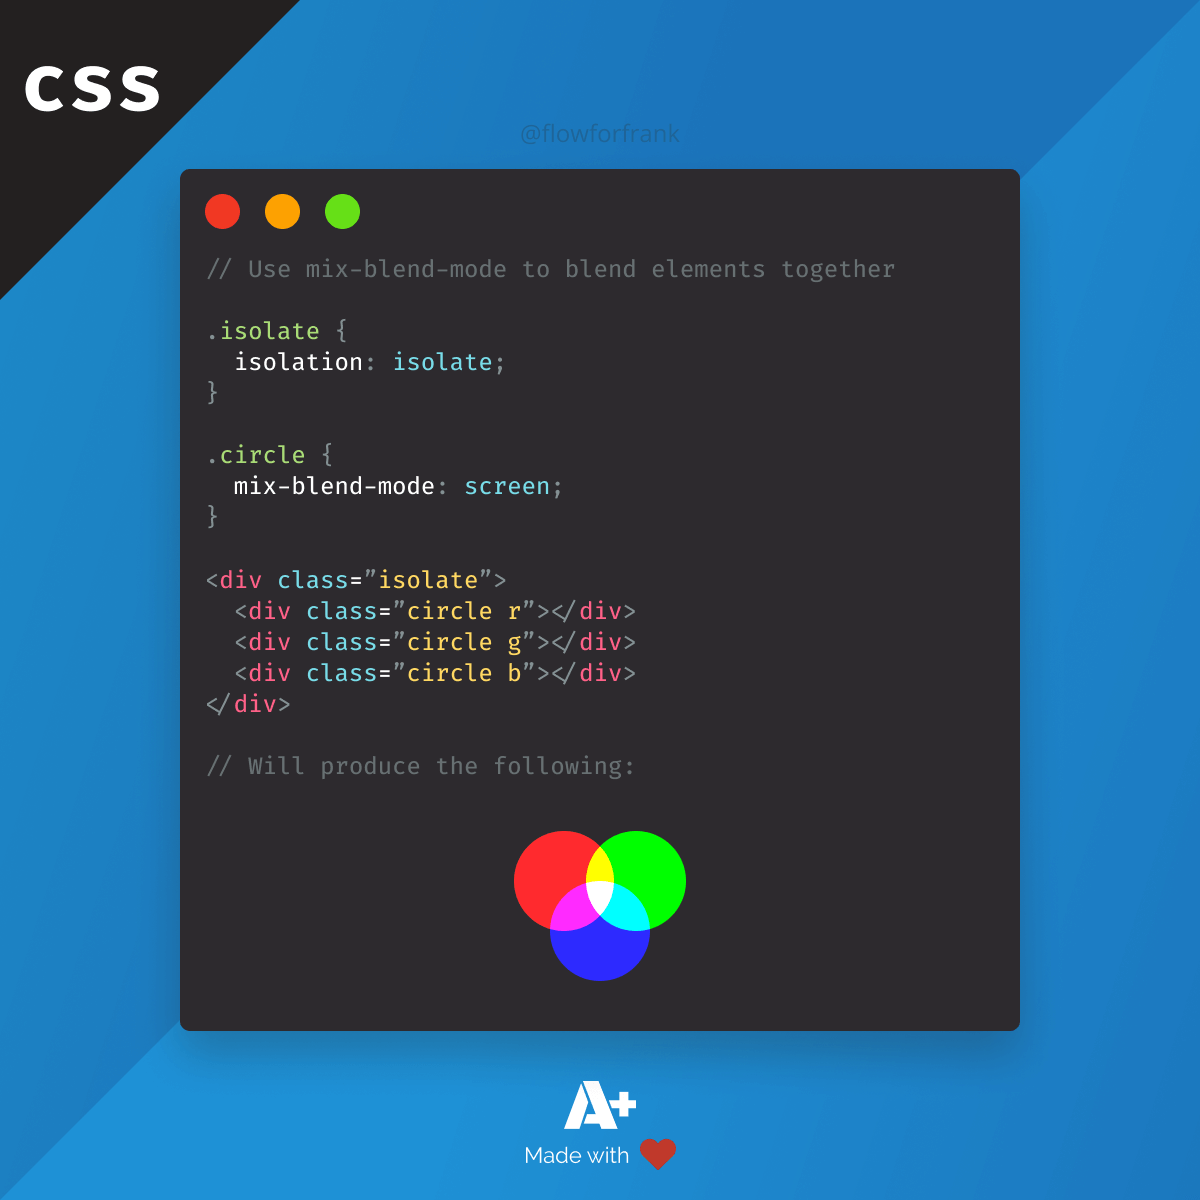 How to Blend Elements Together in CSS